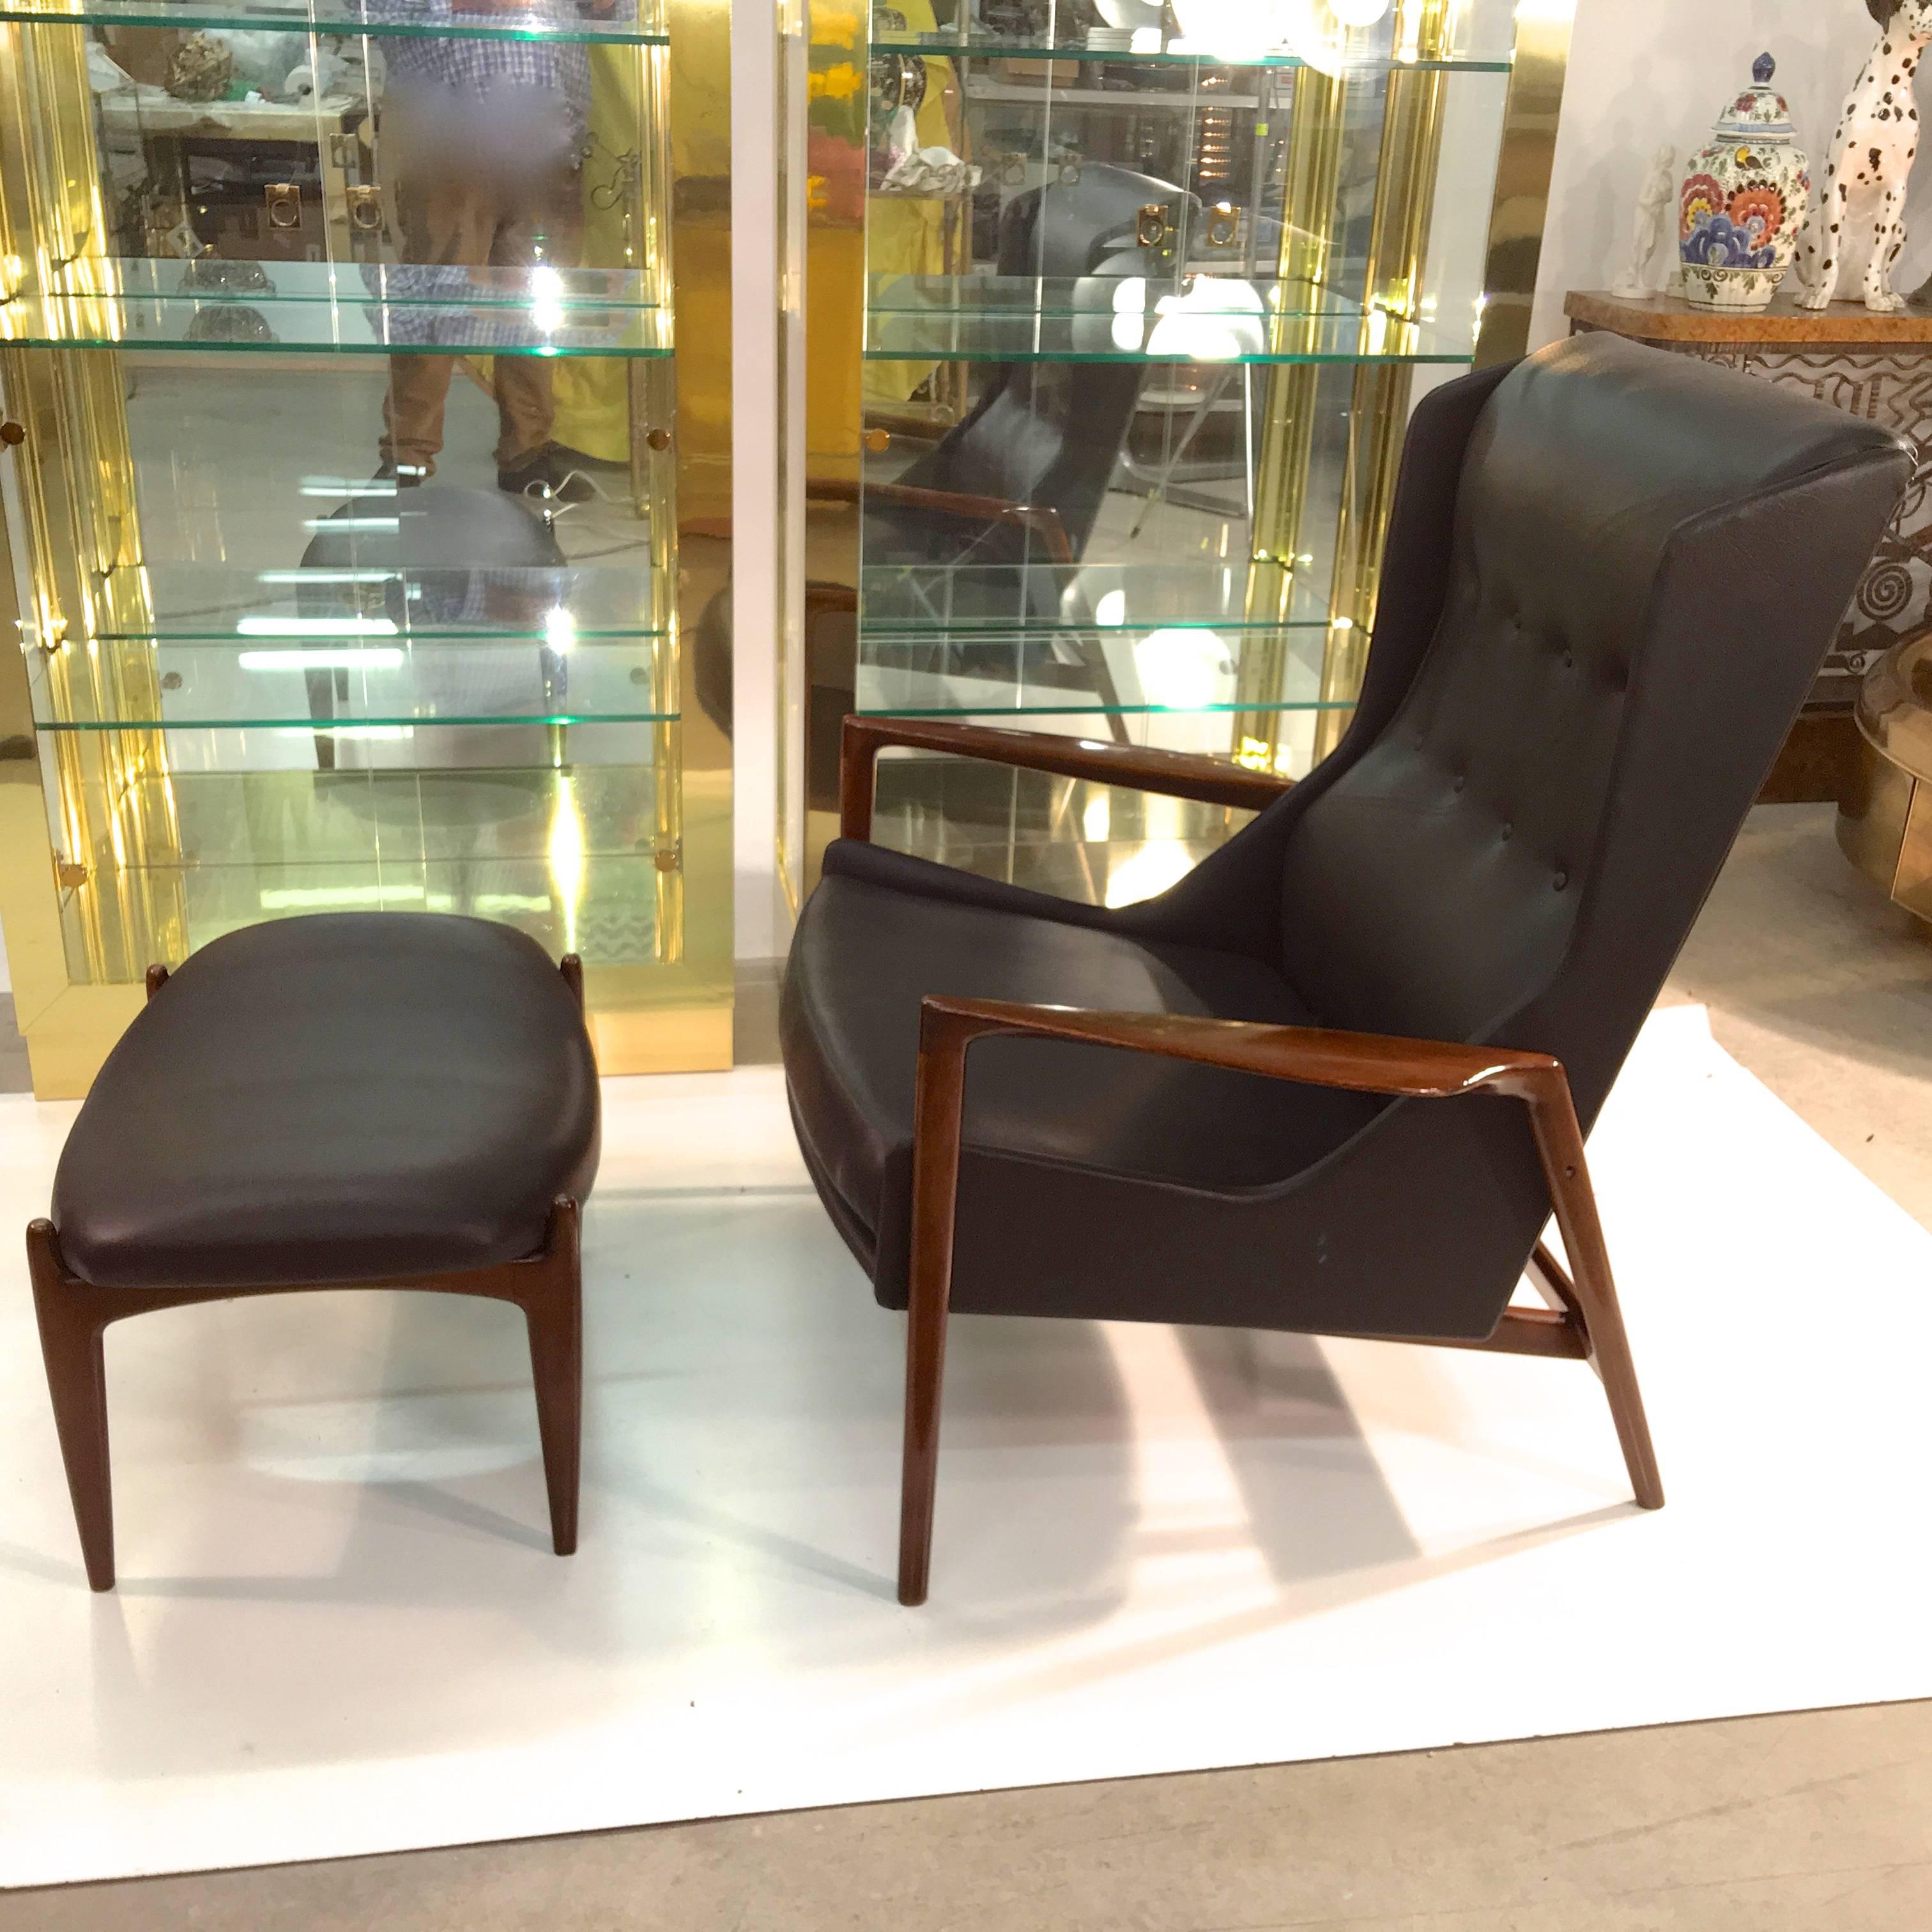 1960s Danish wing back walnut frame lounge chair and ottoman by Ib Kofod Larsen, imported by Selig. Newly reupholstered in black faux leather.

More photos to follow.